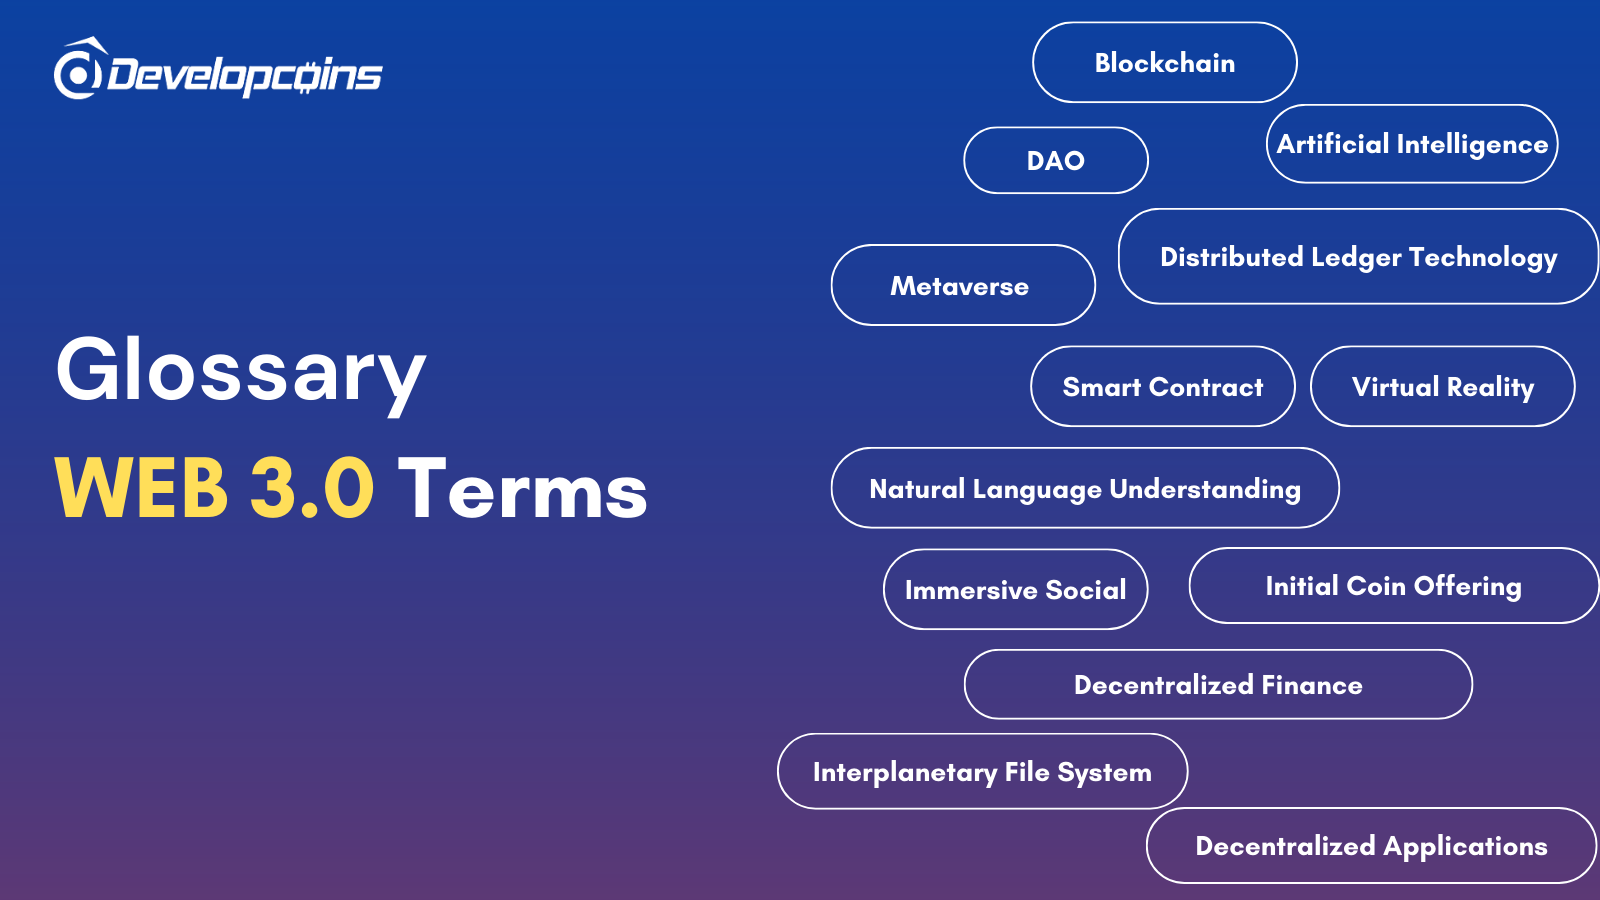 Web 3.0 Glossary - The Essential Terms You Need To Know